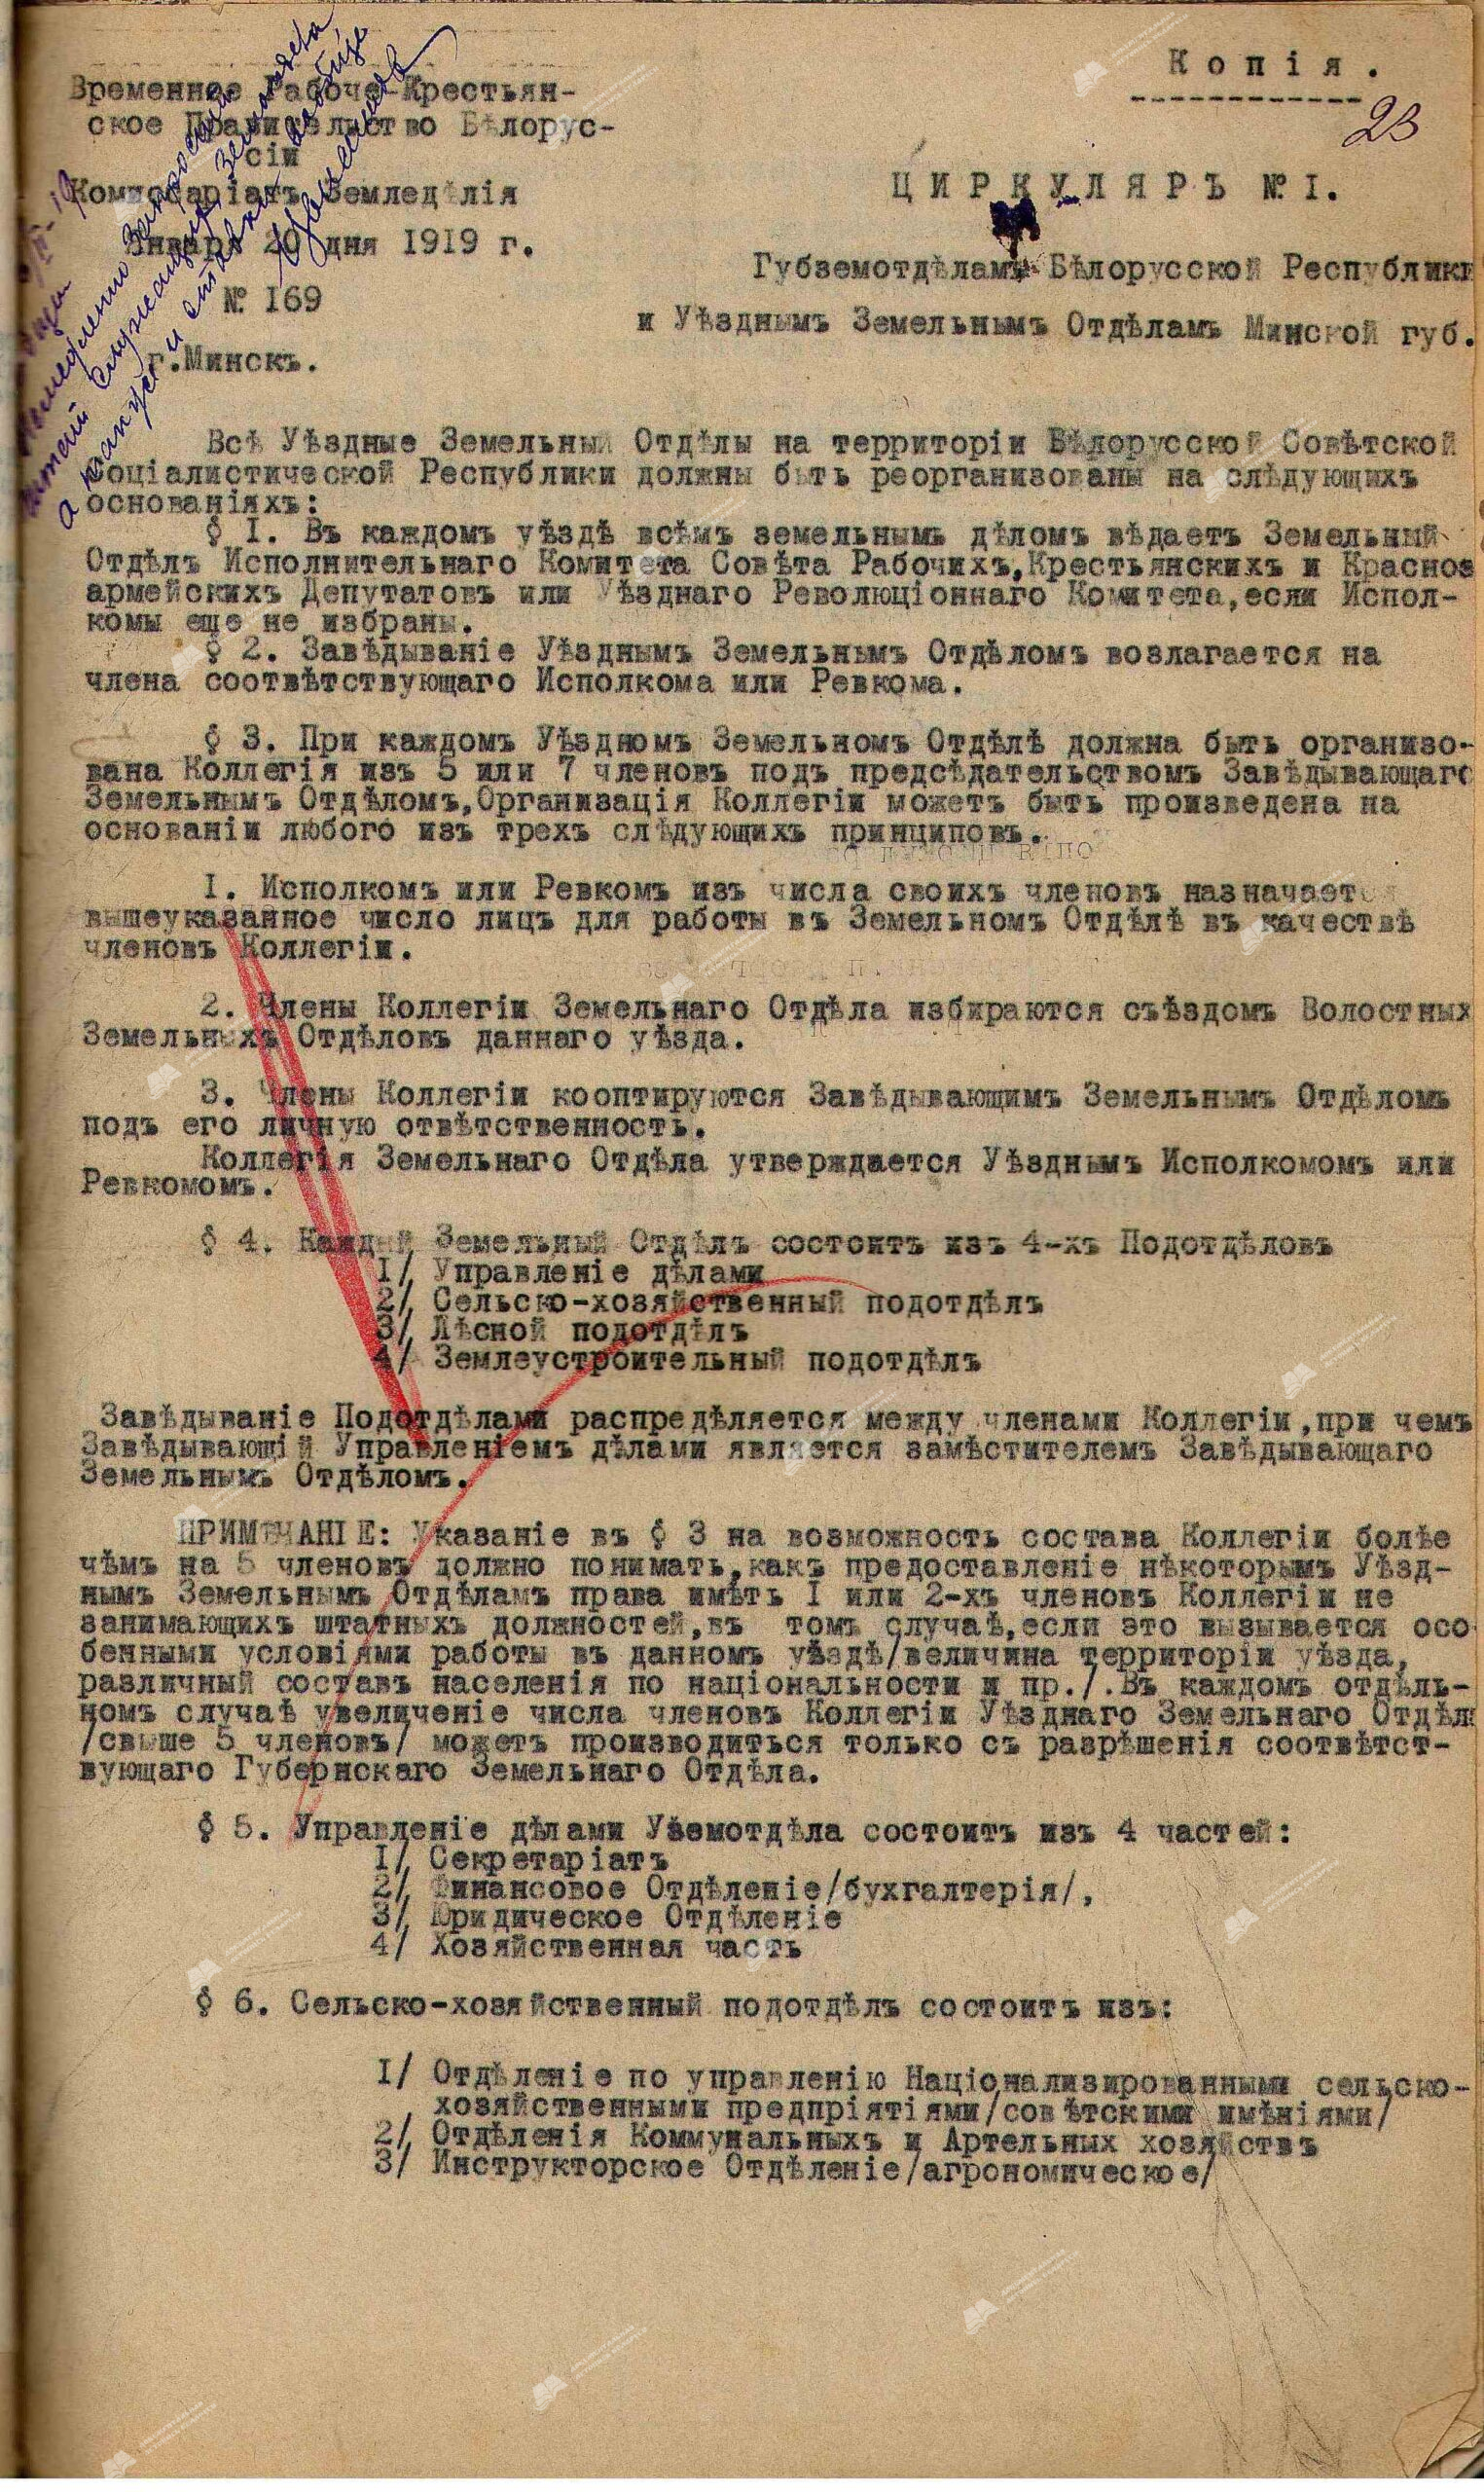 Circular No. 1 of the Commissariat of Agriculture of the Provisional Workers’ and Peasants’ Government of Belarus «On the organization of county land departments on the territory of the Belarusian Soviet Socialist Republic and the scheme of the county land department»-с. 0